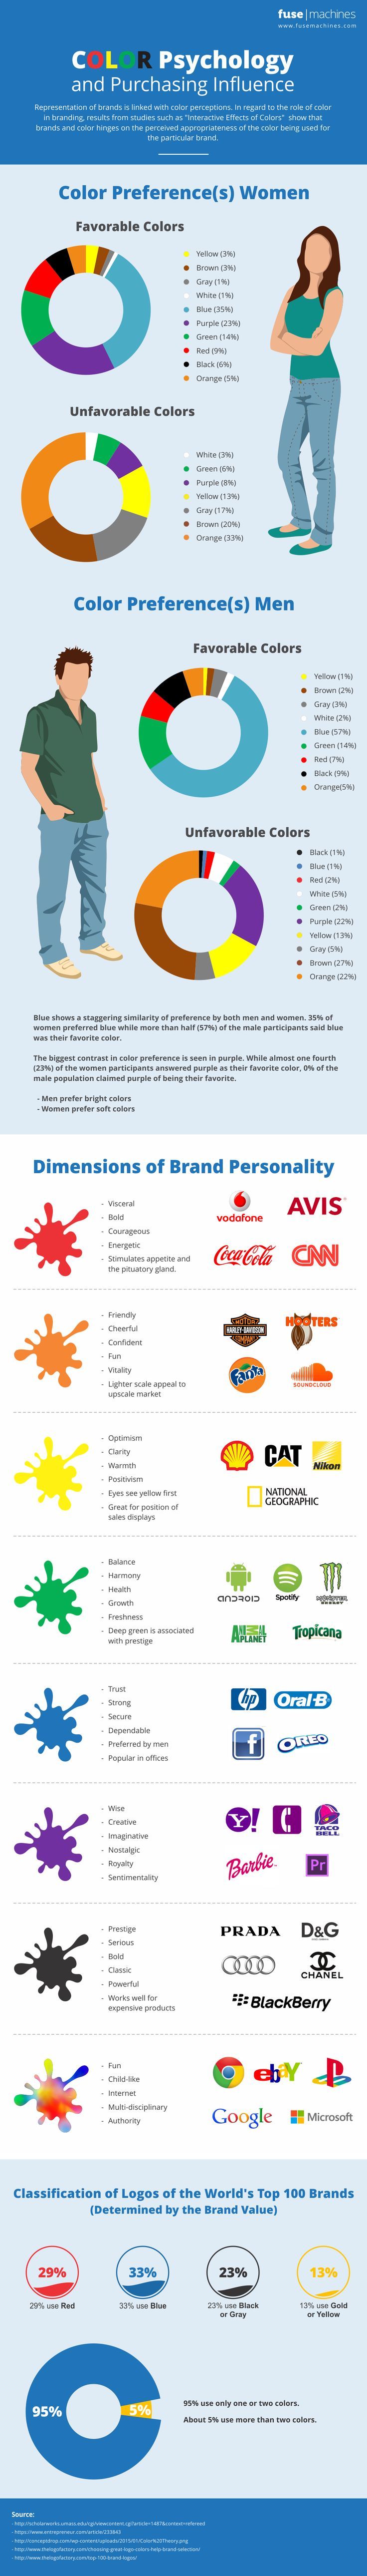 1562785757_340_Psychology-Infographic-Psychology-Influence-of-Colors-in-Branding Psychology Infographic : Psychology : Influence of Colors in Branding and Marketing The psychological and behavioral i...